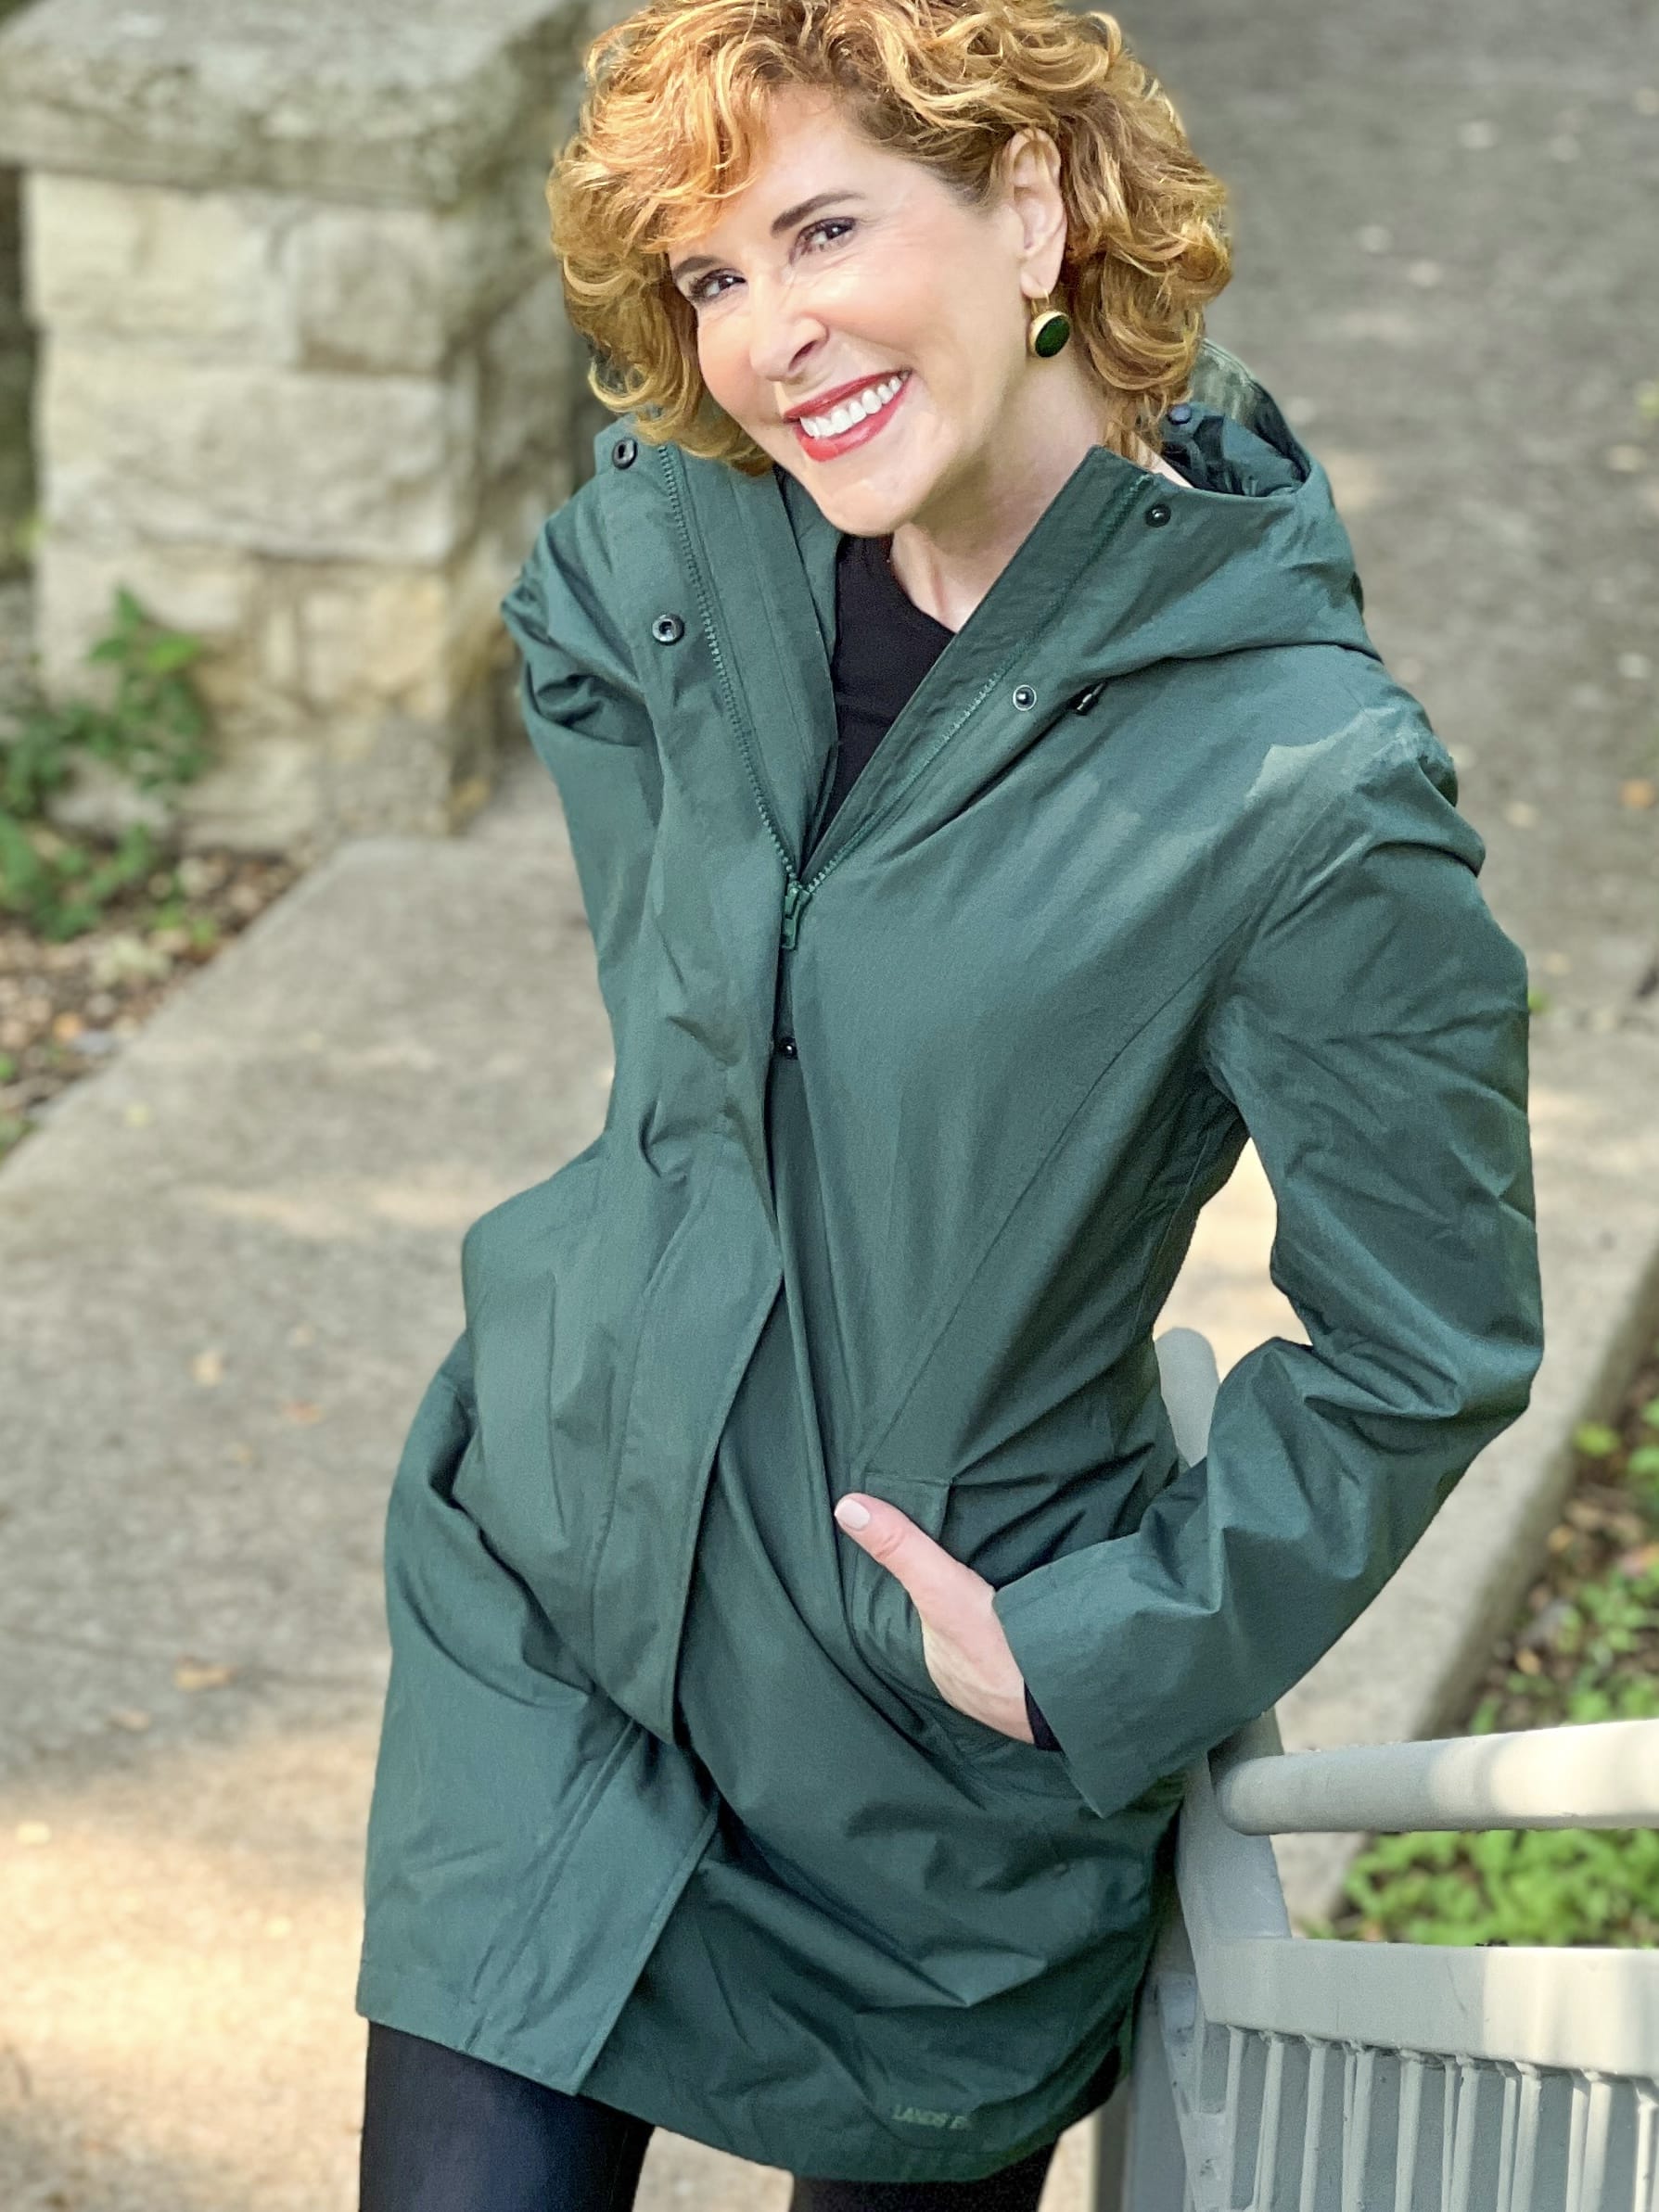 woman wearing green land's end Women's Insulated 3 in 1 Primaloft Parka – outer rain coat part - and black leggings standing by a staircase in the park